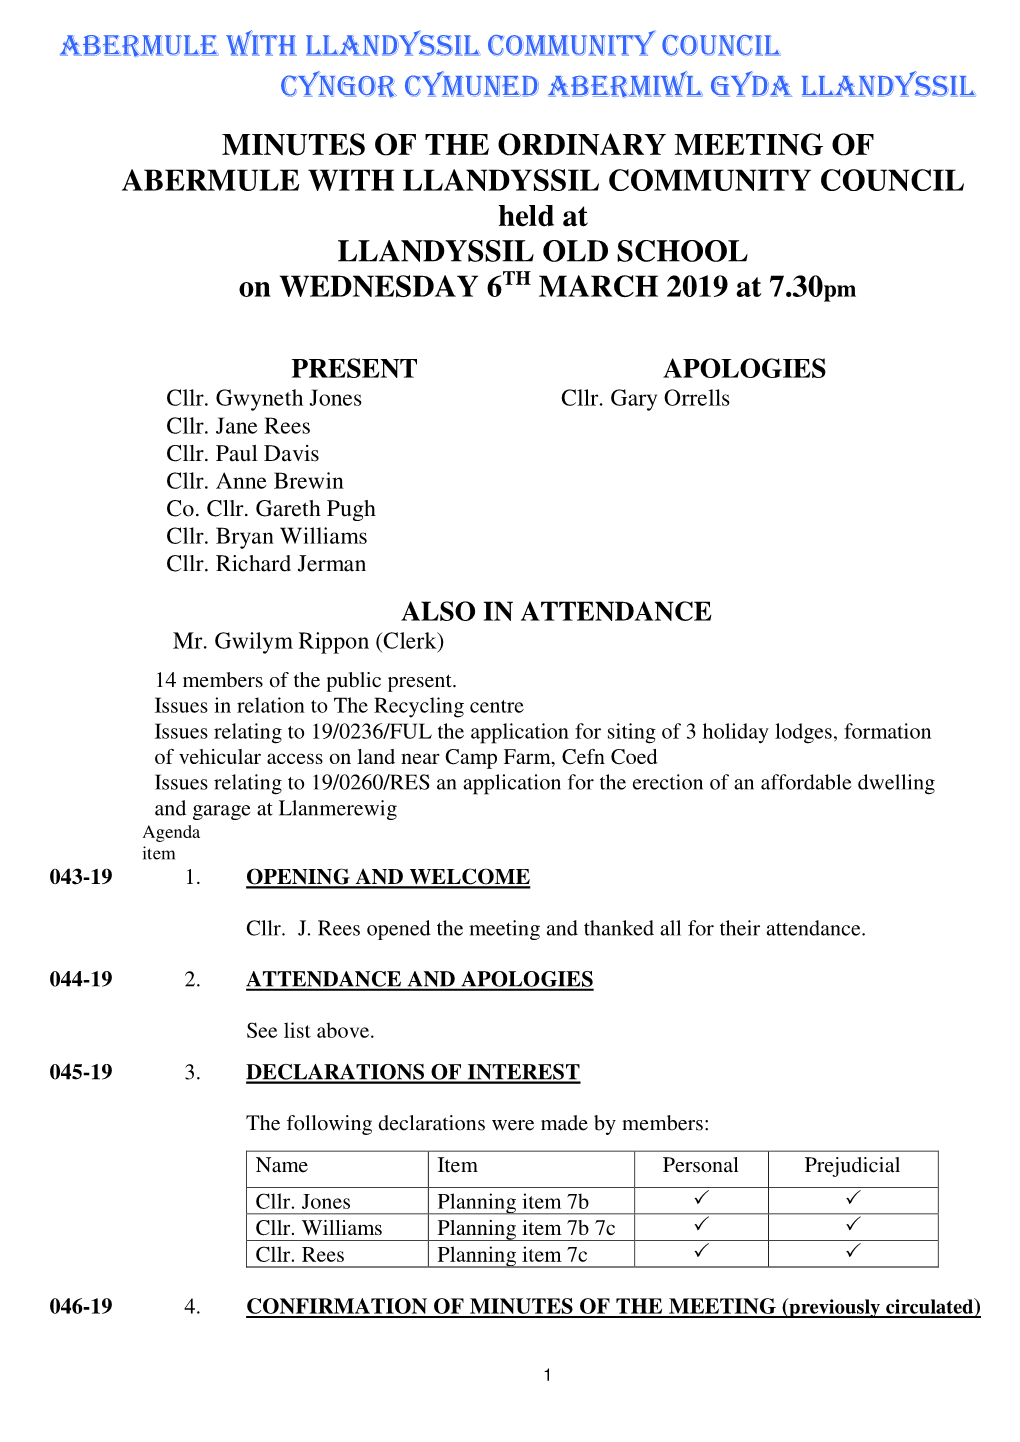 MINUTES of the ORDINARY MEETING of ABERMULE with LLANDYSSIL COMMUNITY COUNCIL Held at LLANDYSSIL OLD SCHOOL on WEDNESDAY 6TH MARCH 2019 at 7.30Pm